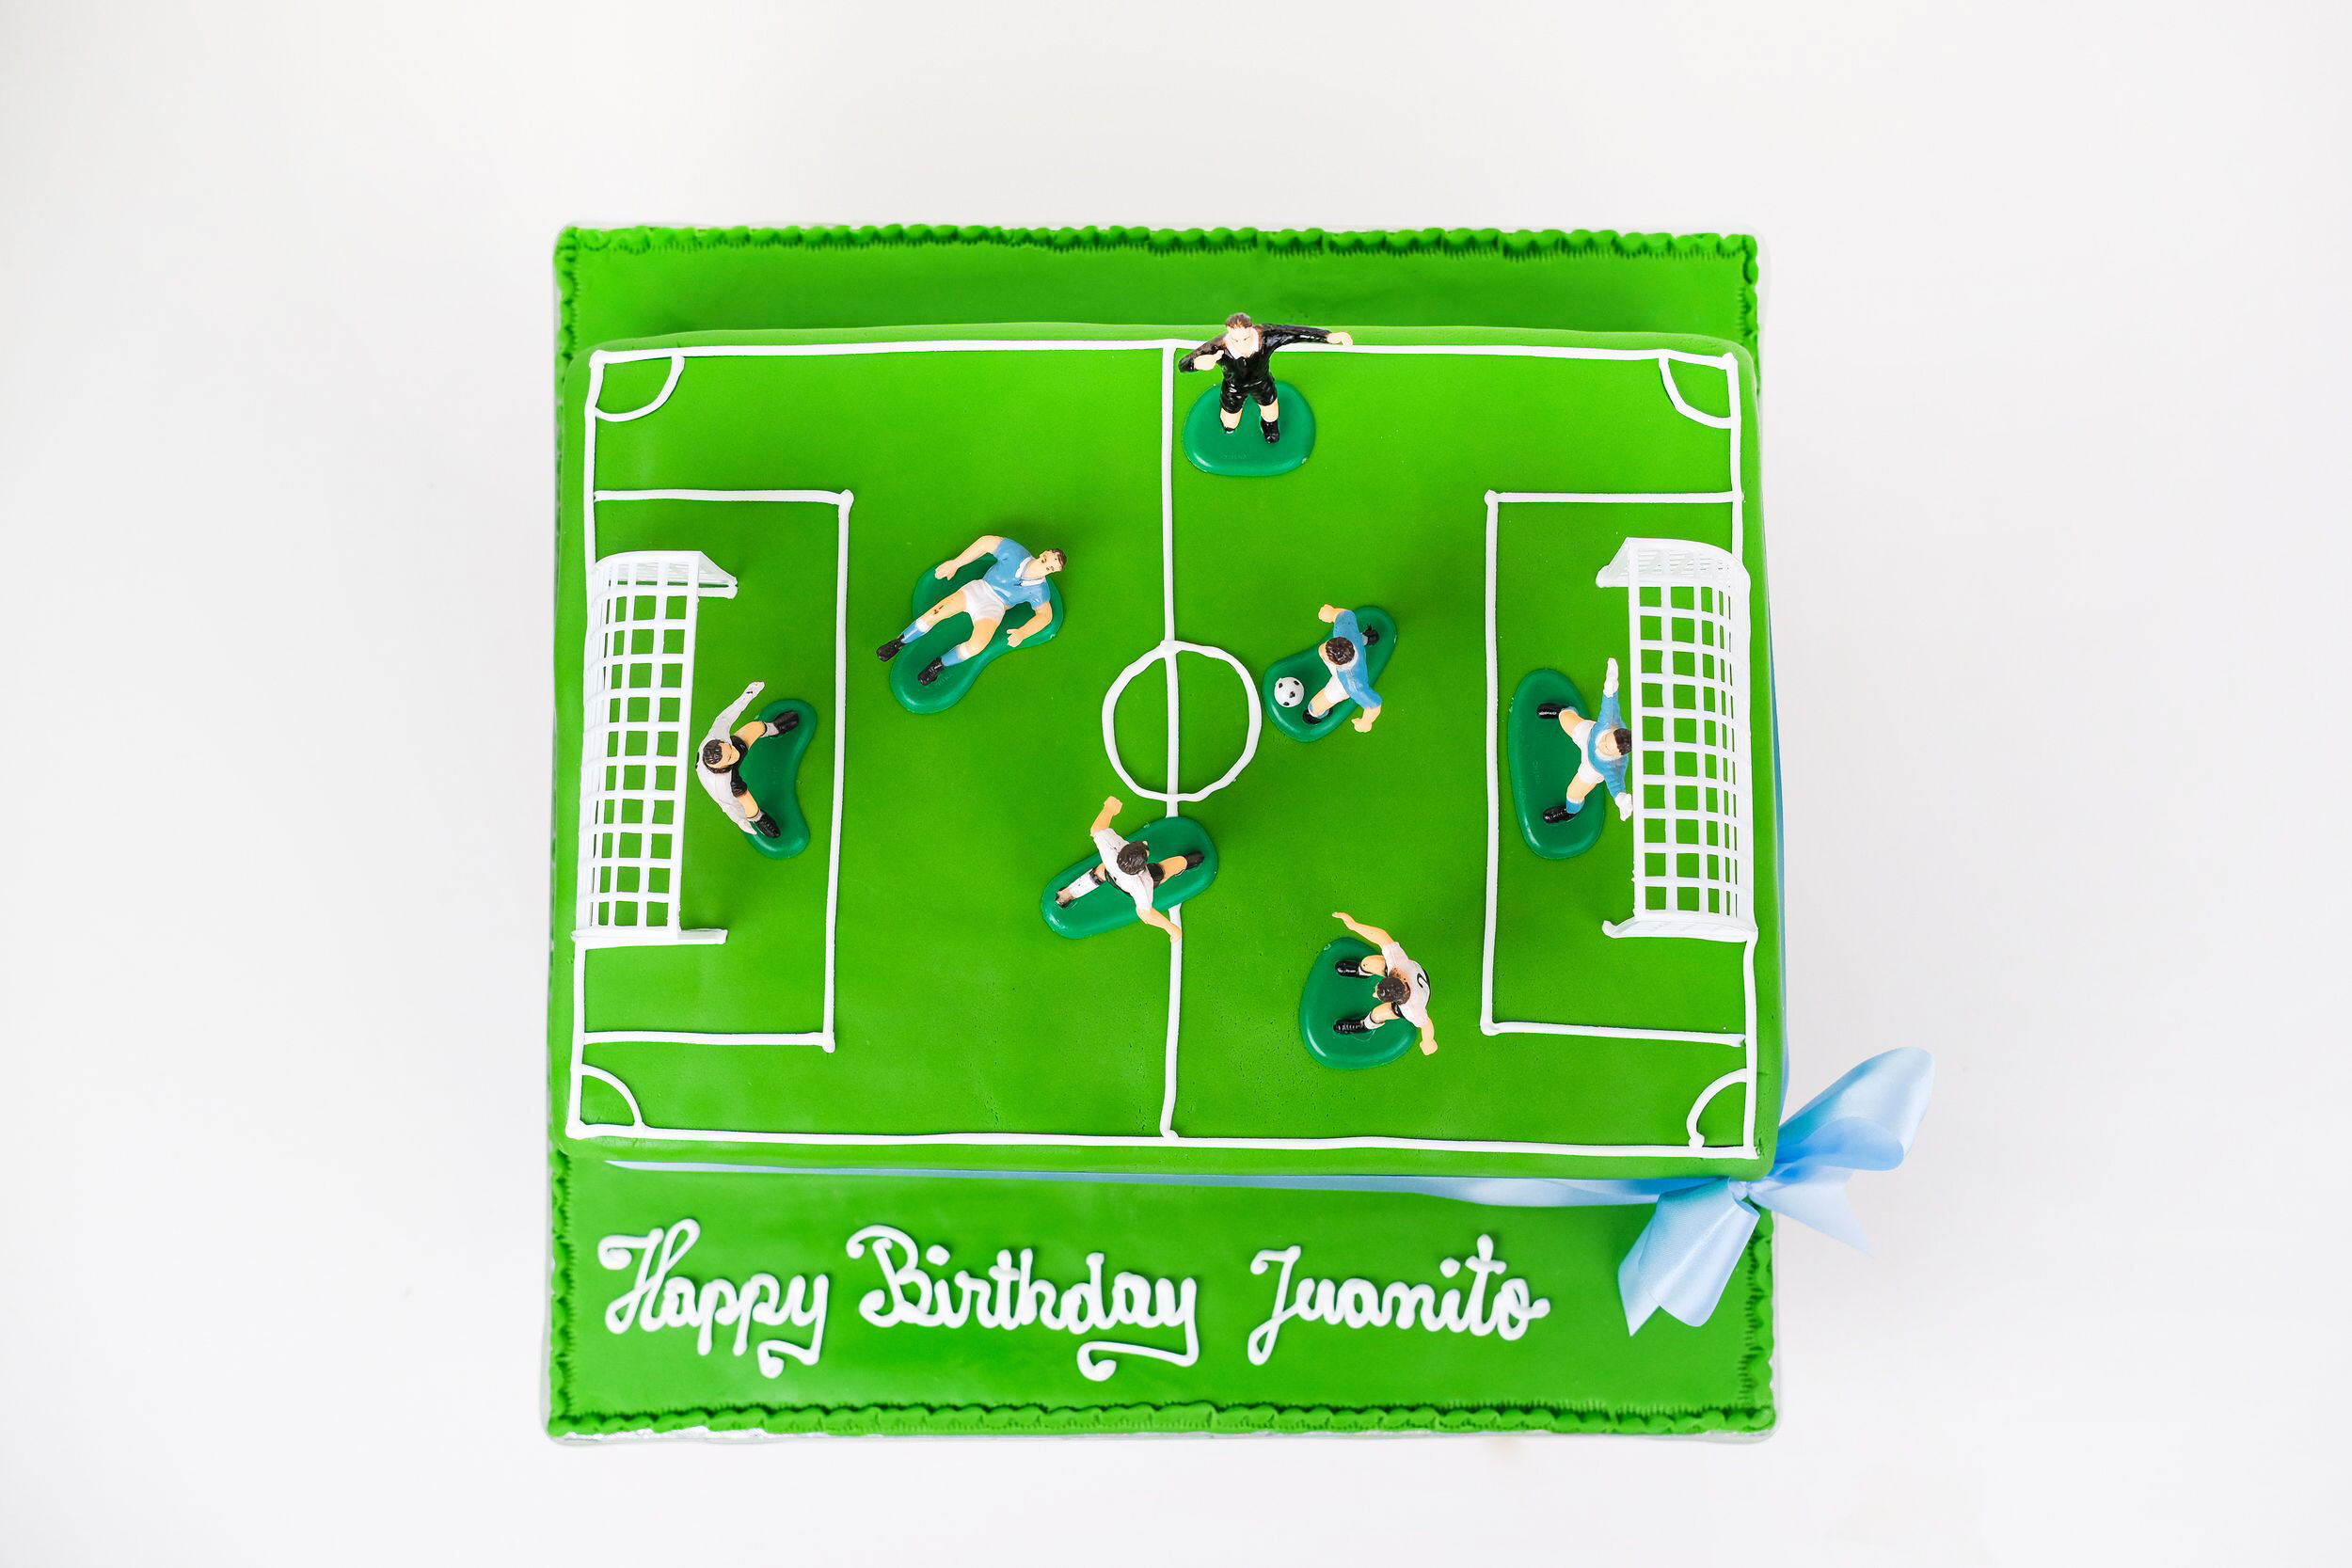 Football pitch – The Cake Shop